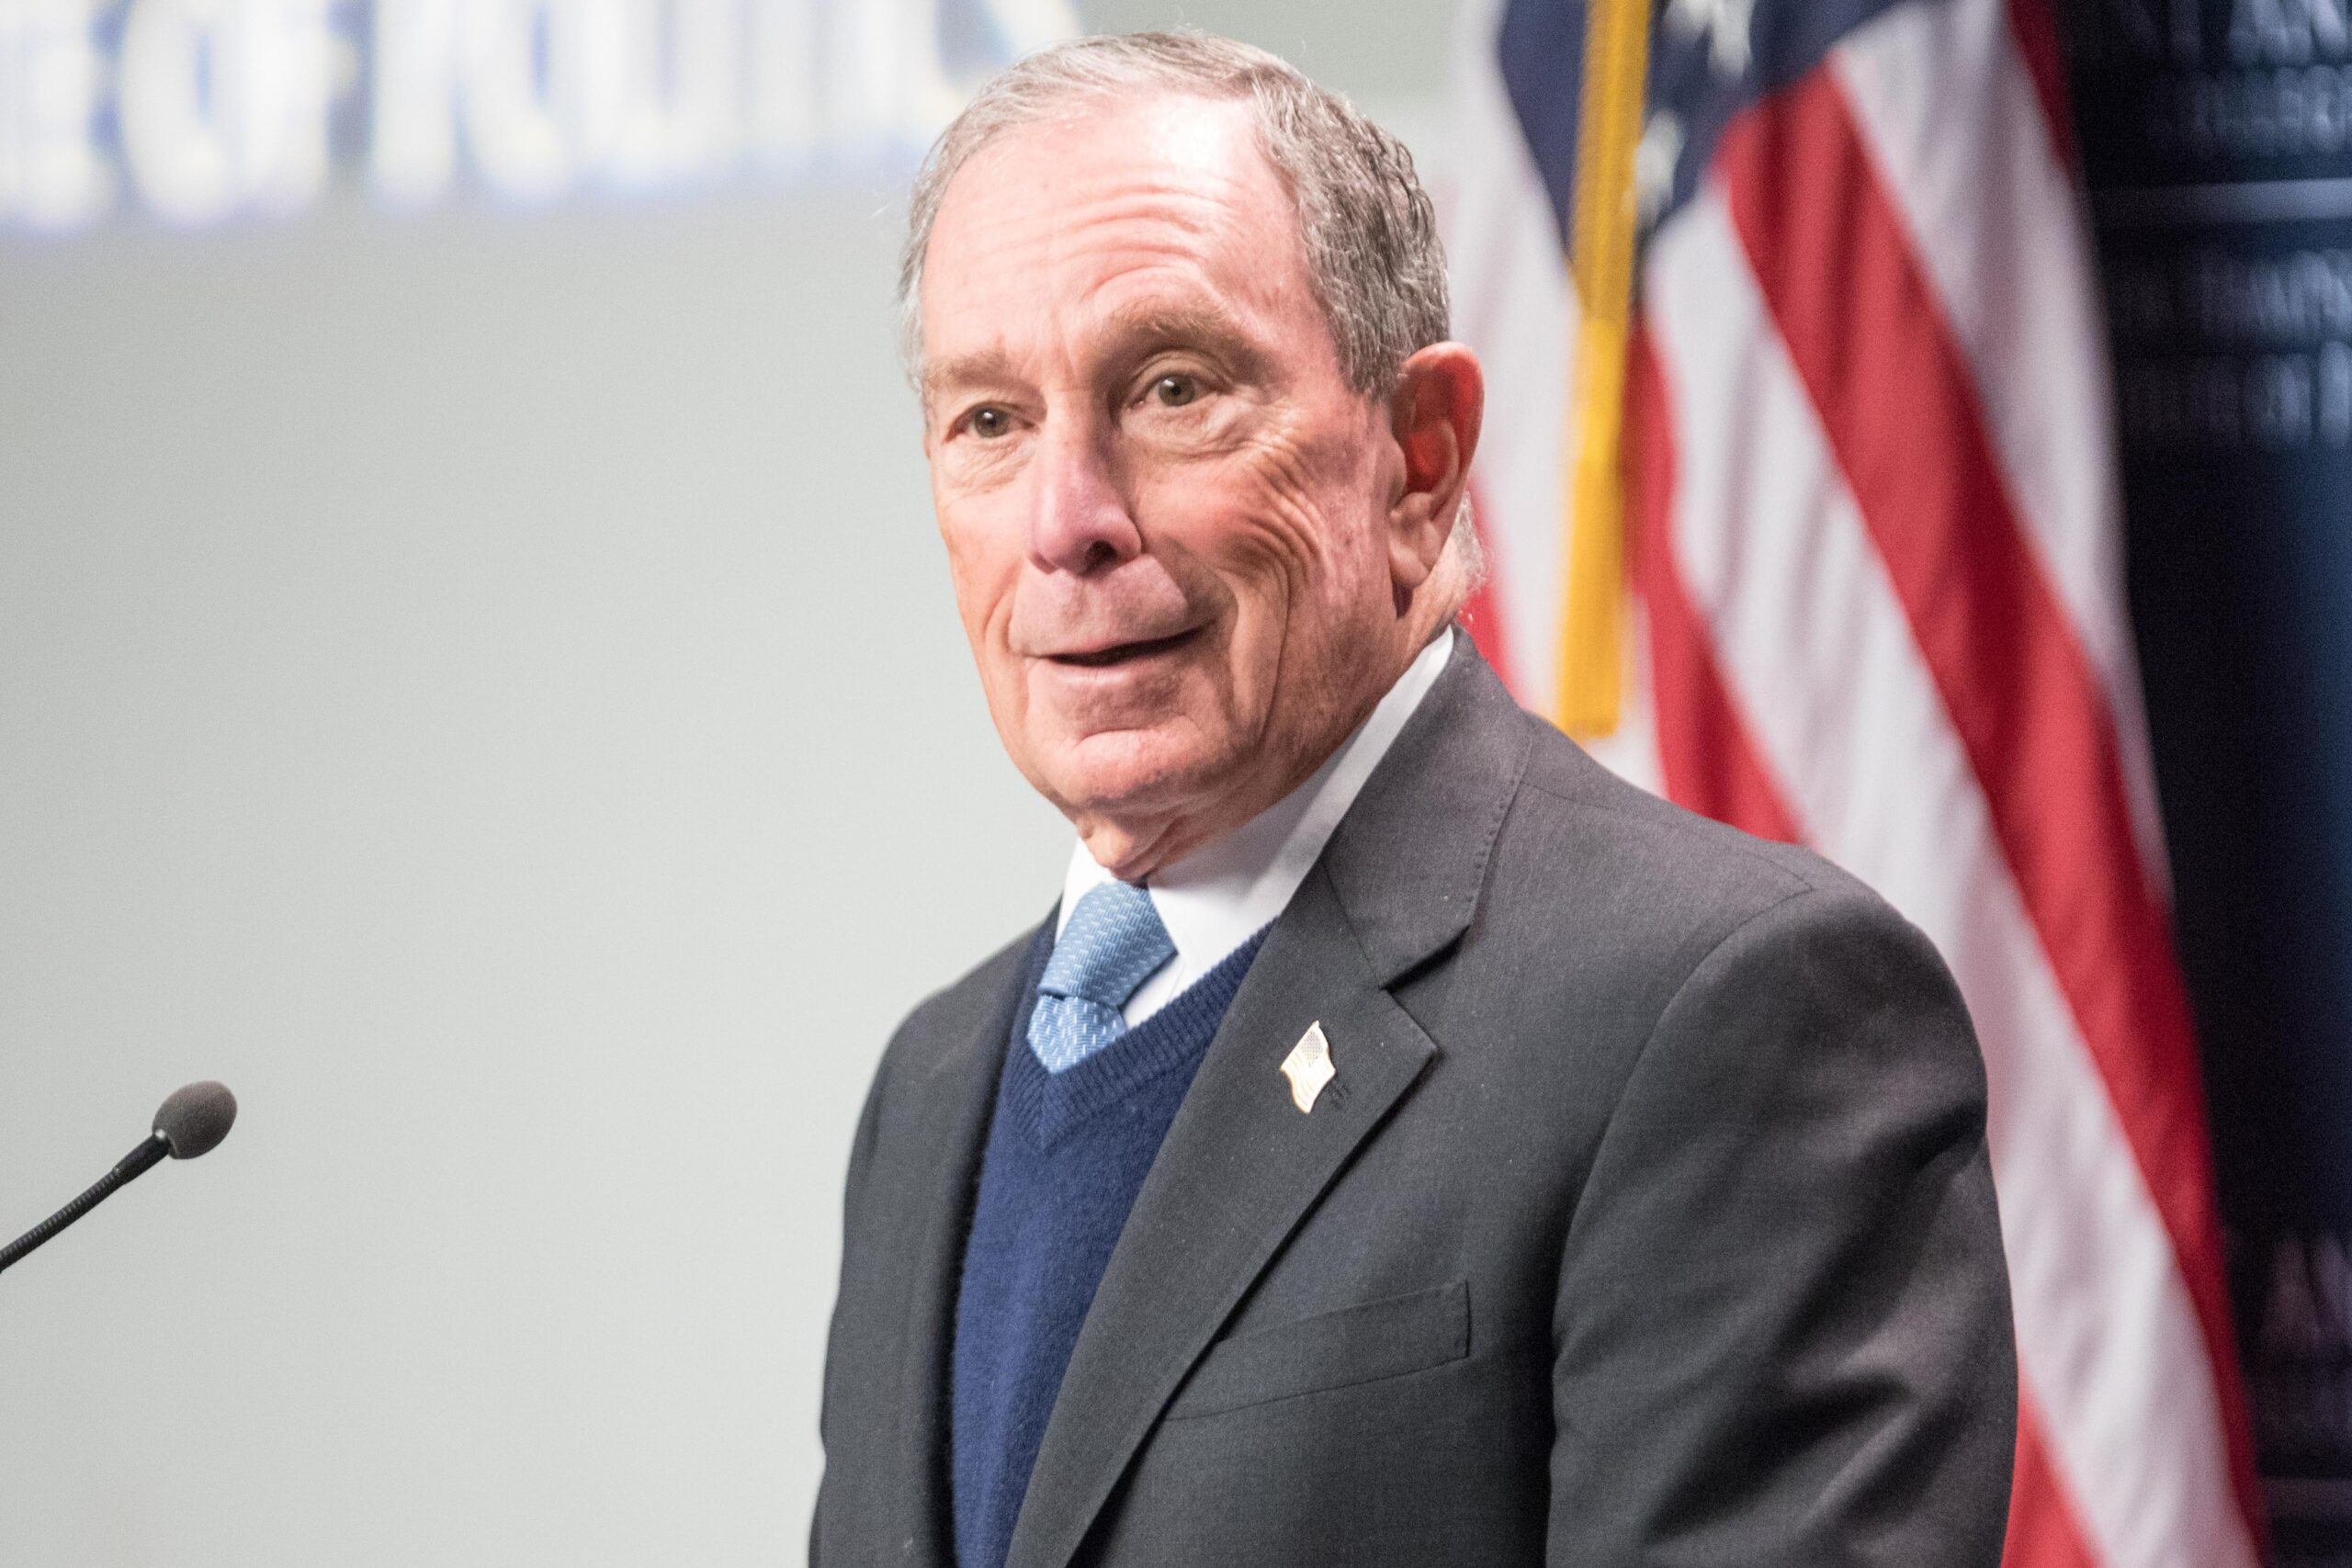 Michael Bloomberg Is Dropping Out of the Presidential Race